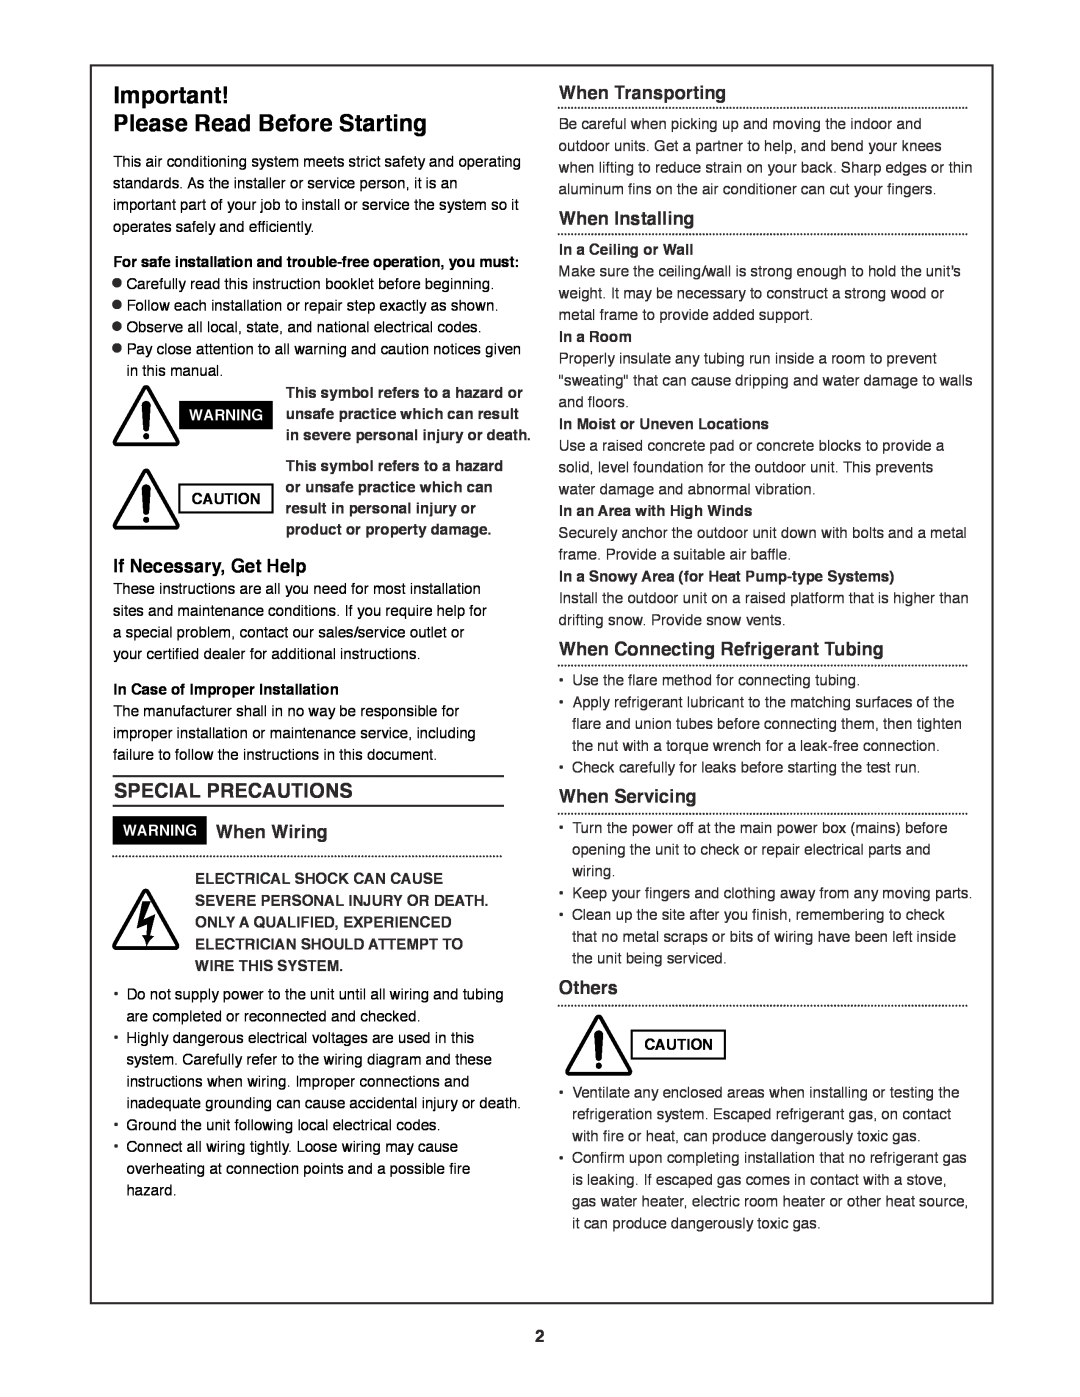 Sanyo CH1271 Special Precautions, Please Read Before Starting, If Necessary, Get Help, WARNING When Wiring, When Servicing 